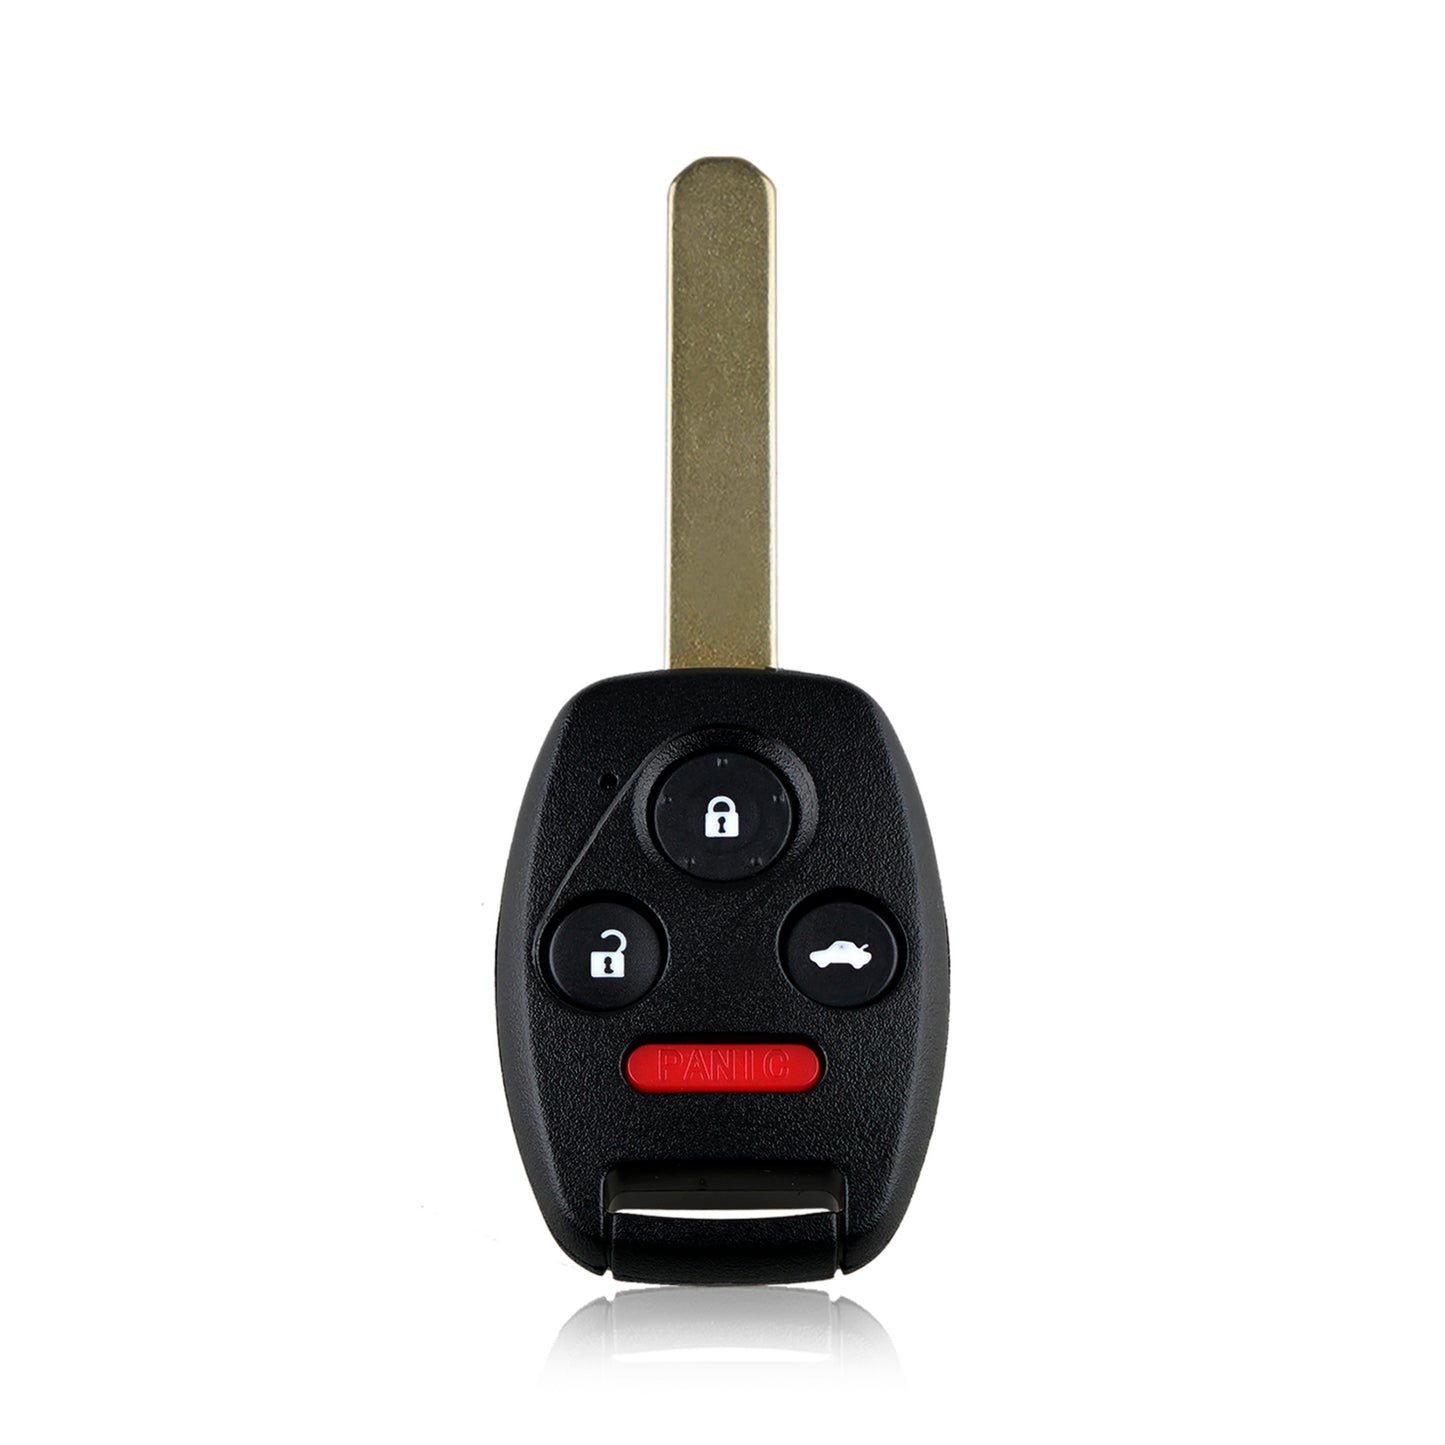 4 Buttons 313.8MHz Keyless Entry Fob Remote Car Key For 2003 - 2010 Honda Accord Element FCC ID: OUCG8D-380H-A SKU : J054